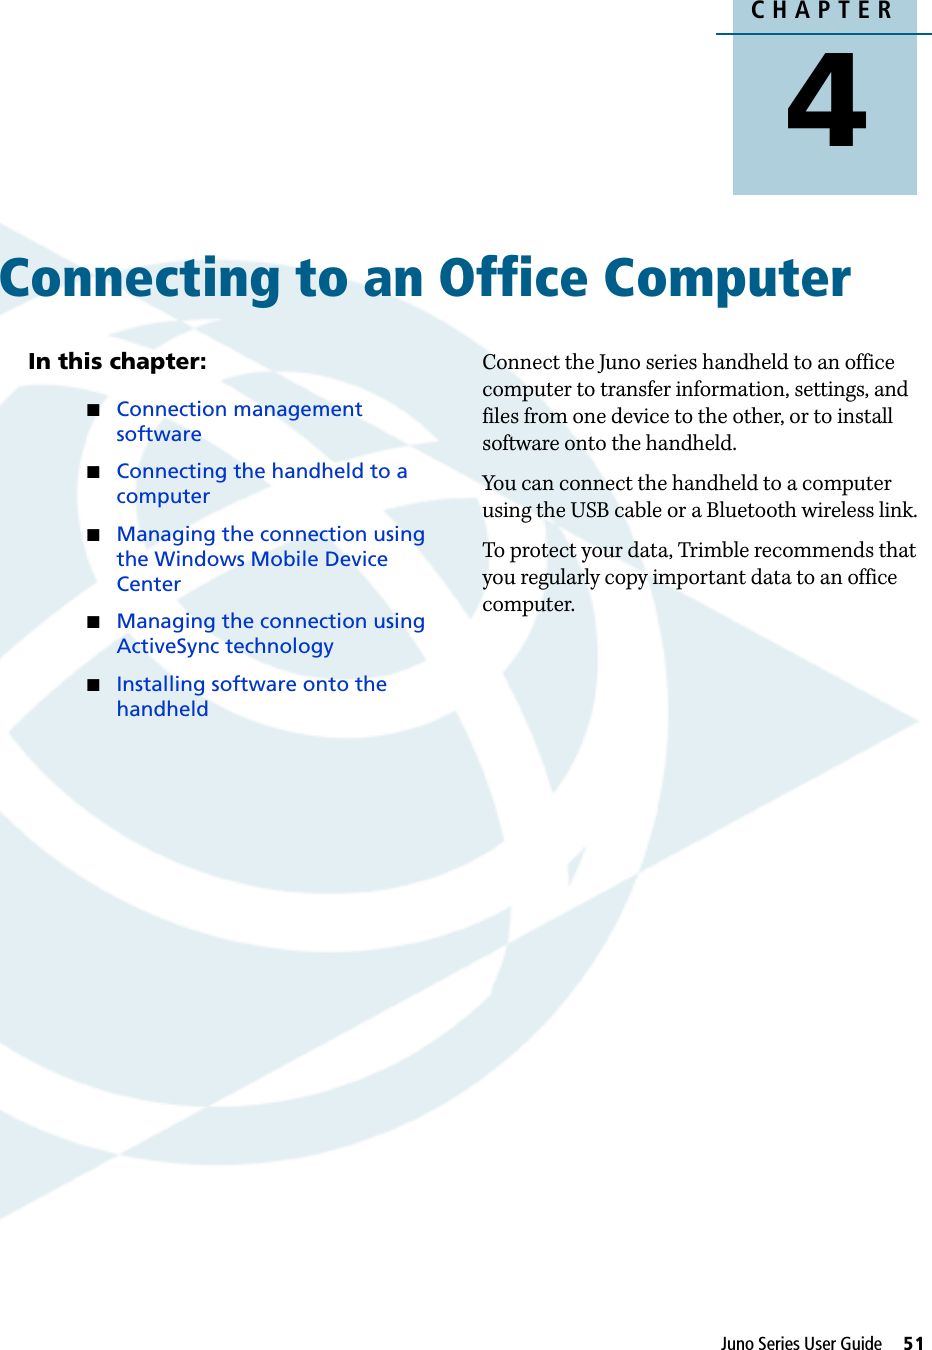 CHAPTER4Juno Series User Guide     51Connecting to an Office Computer 4In this chapter:Connection management softwareConnecting the handheld to a computerManaging the connection using the Windows Mobile Device CenterManaging the connection using ActiveSync technologyInstalling software onto the handheldConnect the Juno series handheld to an office computer to transfer information, settings, and files from one device to the other, or to install software onto the handheld.You can connect the handheld to a computer using the USB cable or a Bluetooth wireless link.To protect your data, Trimble recommends that you regularly copy important data to an office computer.